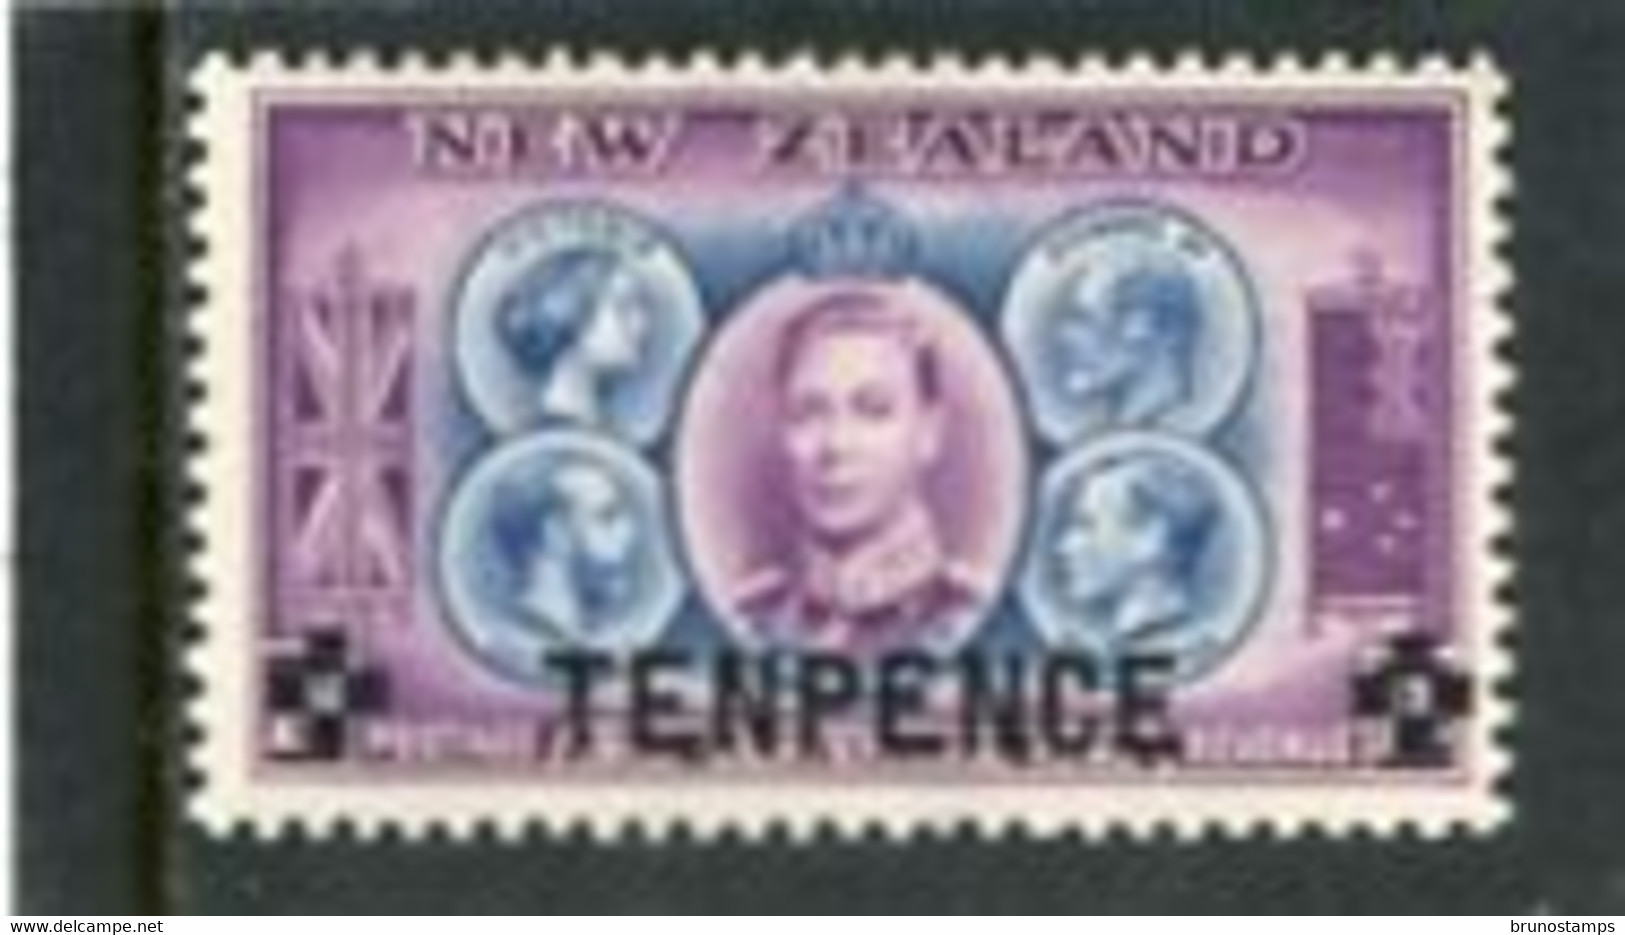 NEW ZEALAND - 1944  OVERPRINTED  MINT NH - Unused Stamps